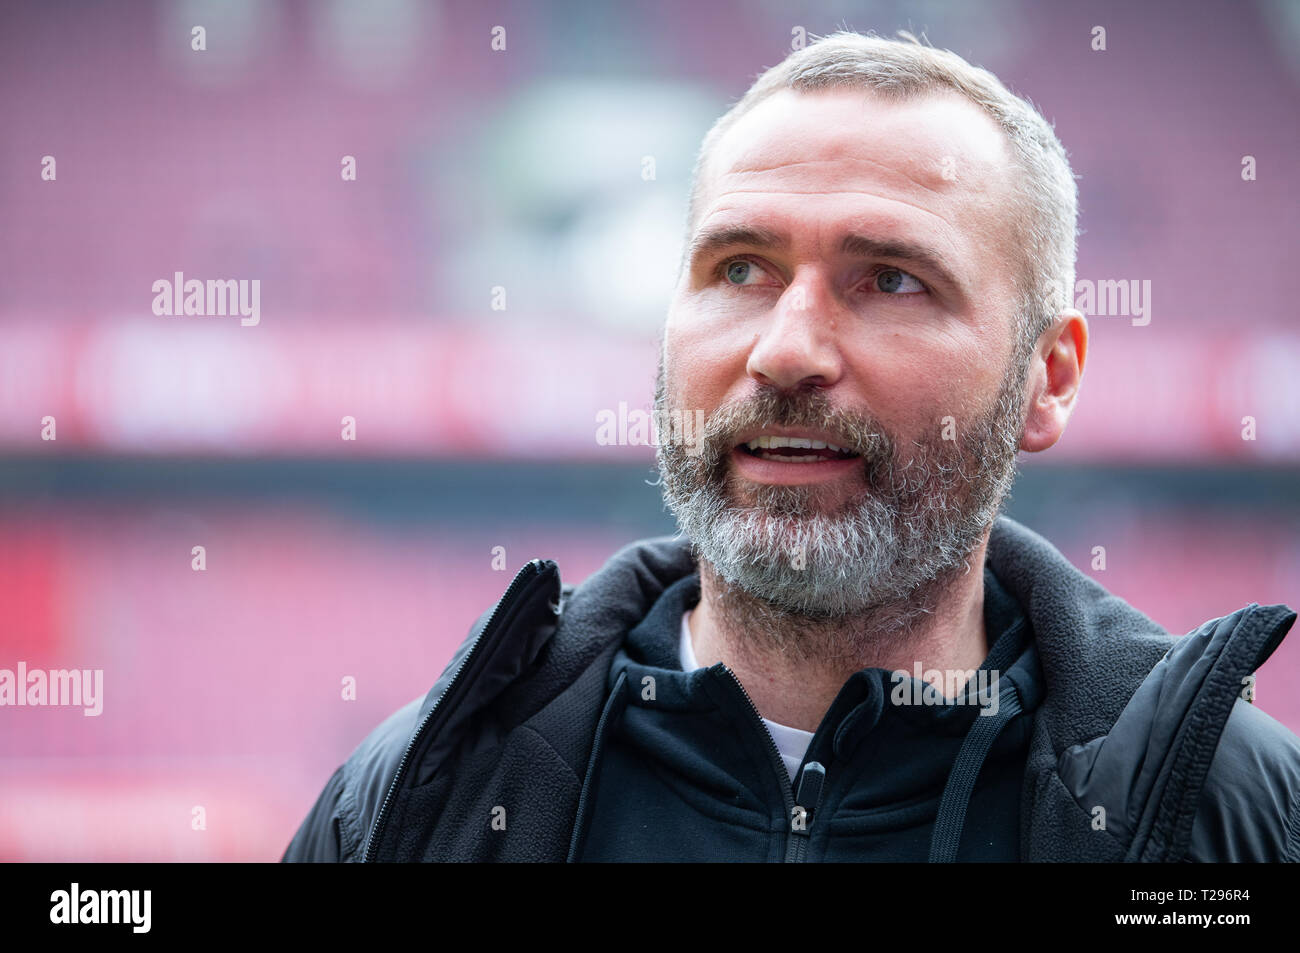 Cologne, Germany. 31st Mar, 2019.  Soccer: 2nd Bundesliga, 1st FC Cologne - Holstein Kiel, 27th matchday in the Rhein-Energie-Stadion. Kiel's coach Tim Walter is about to play on the sidelines. Photo: Guido Kirchner/dpa - IMPORTANT NOTE: In accordance with the requirements of the DFL Deutsche Fußball Liga or the DFB Deutscher Fußball-Bund, it is prohibited to use or have used photographs taken in the stadium and/or the match in the form of sequence images and/or video-like photo sequences. Credit: dpa picture alliance/Alamy Live News Stock Photo